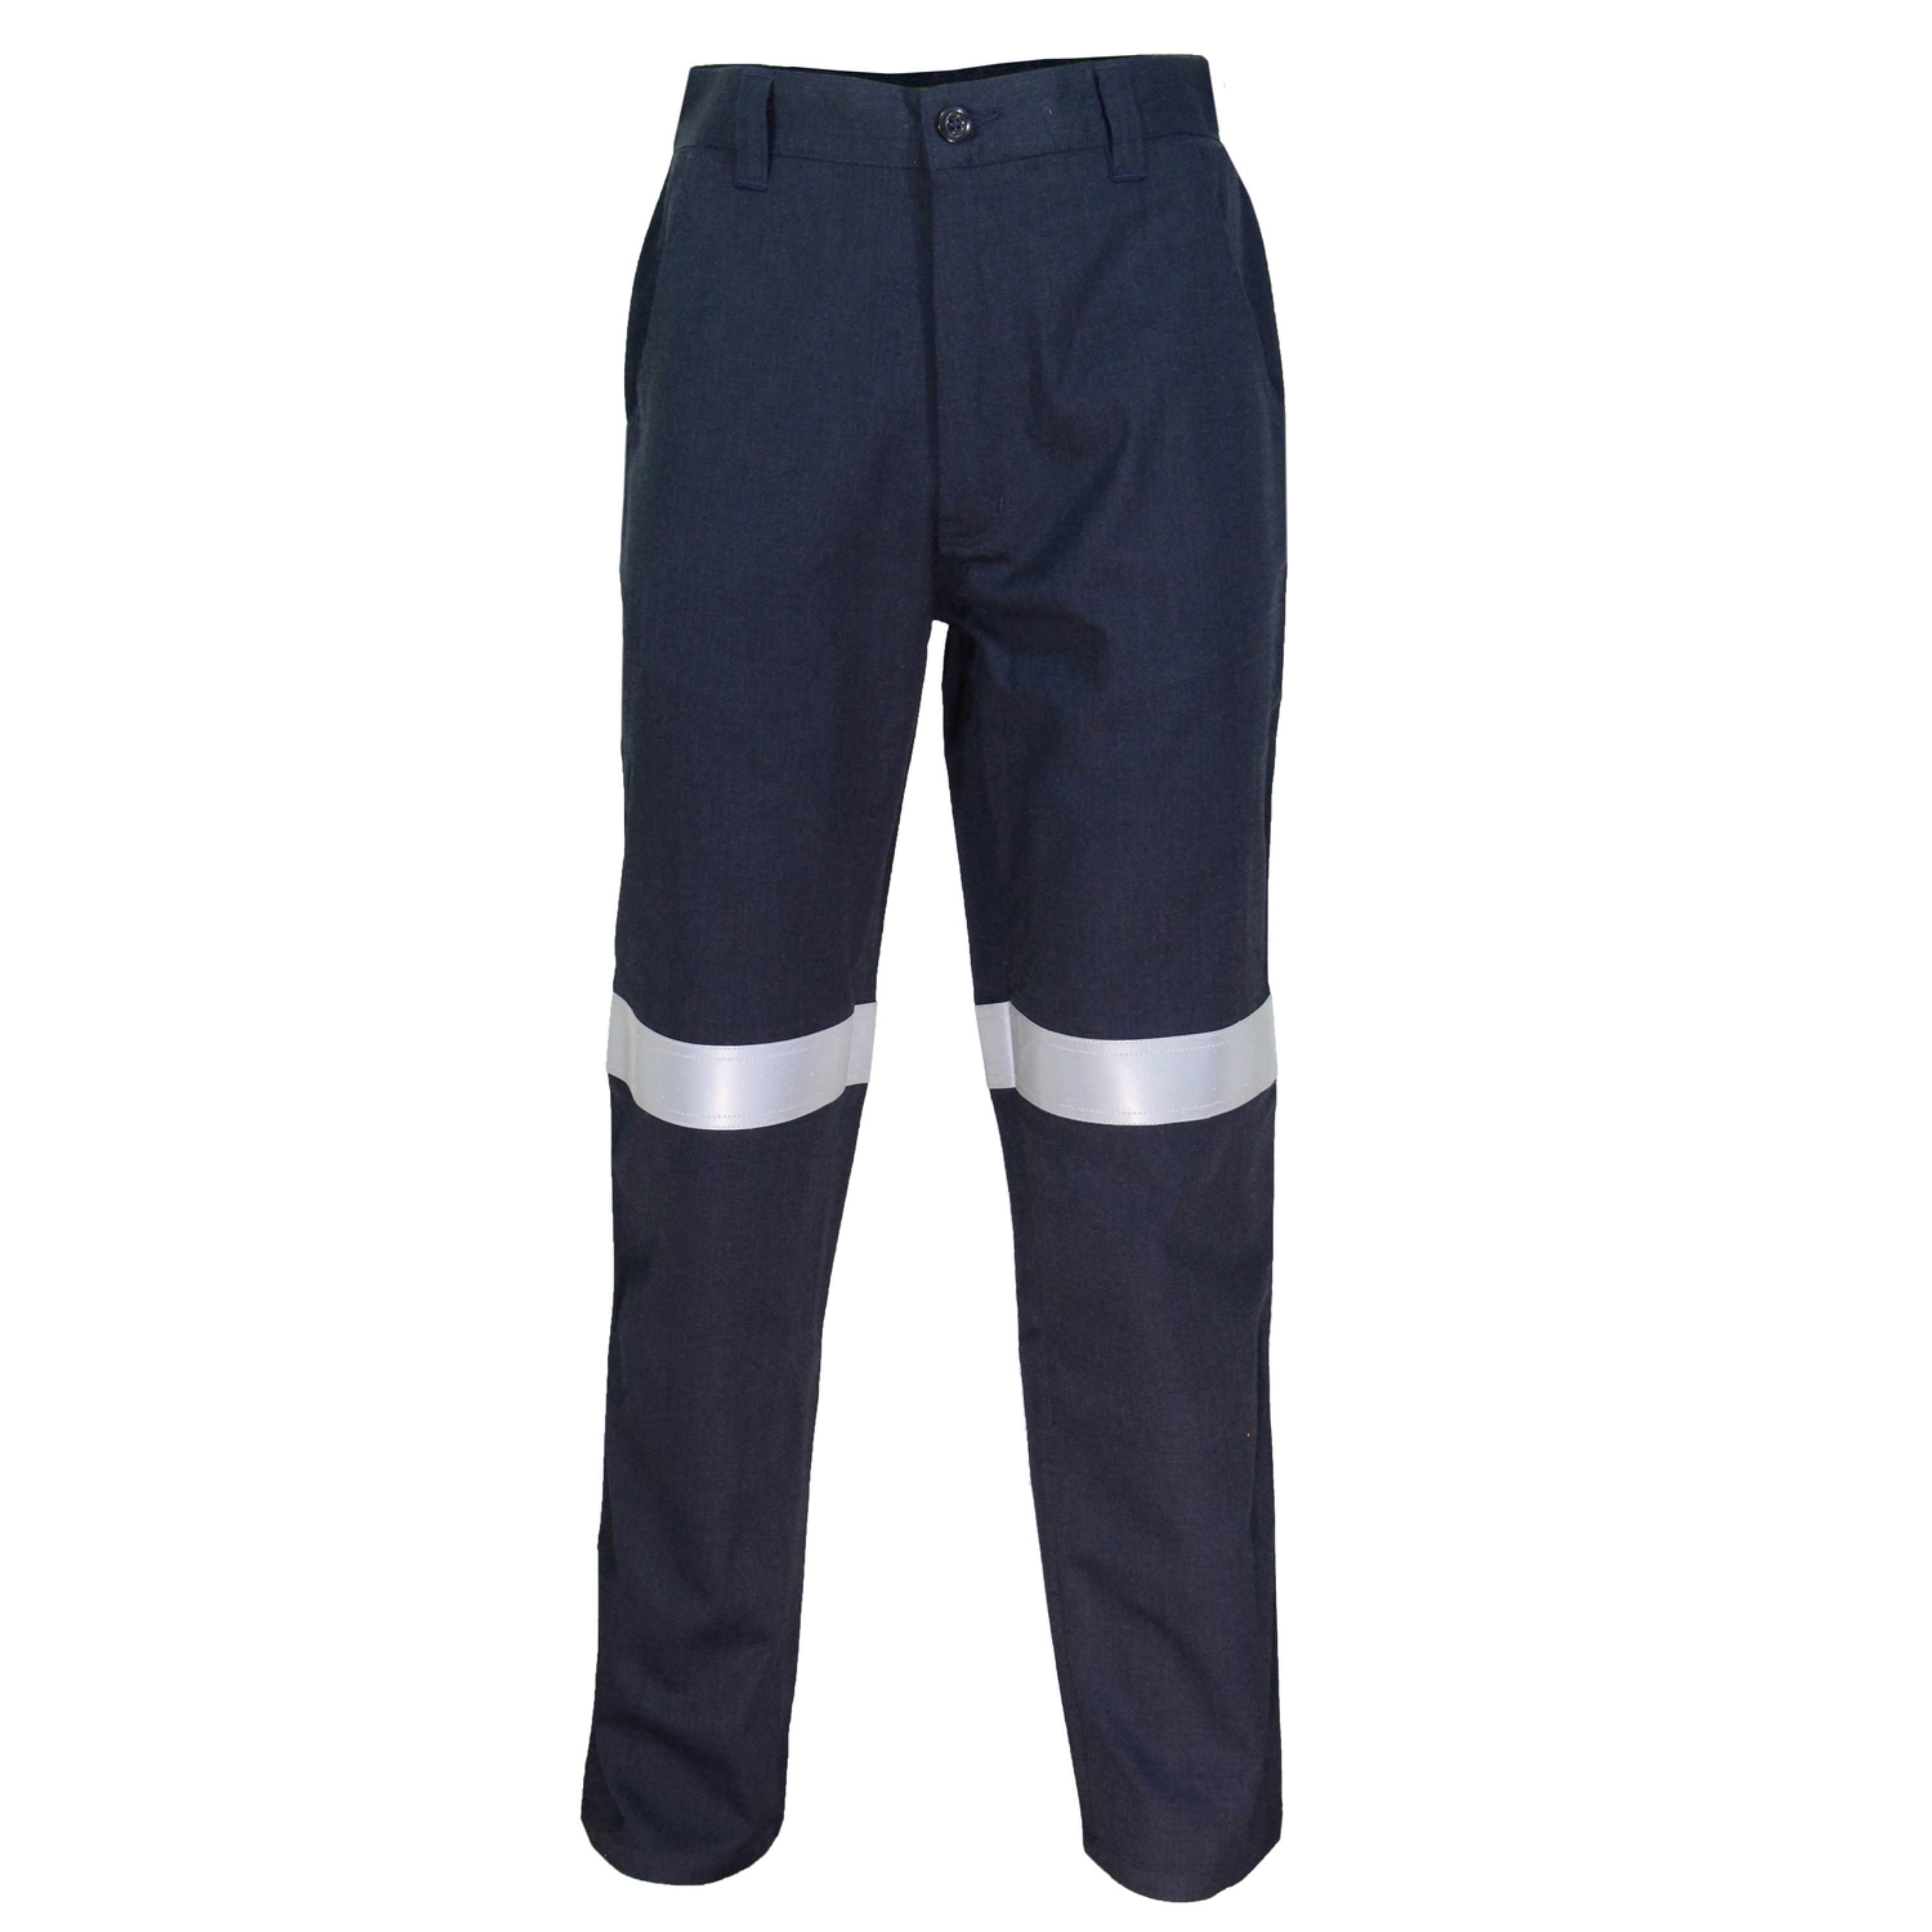 PANTS RIPSTOP INHERENT FR PPE2 NAVY 230GSM ATPV8+ SIZE  102R